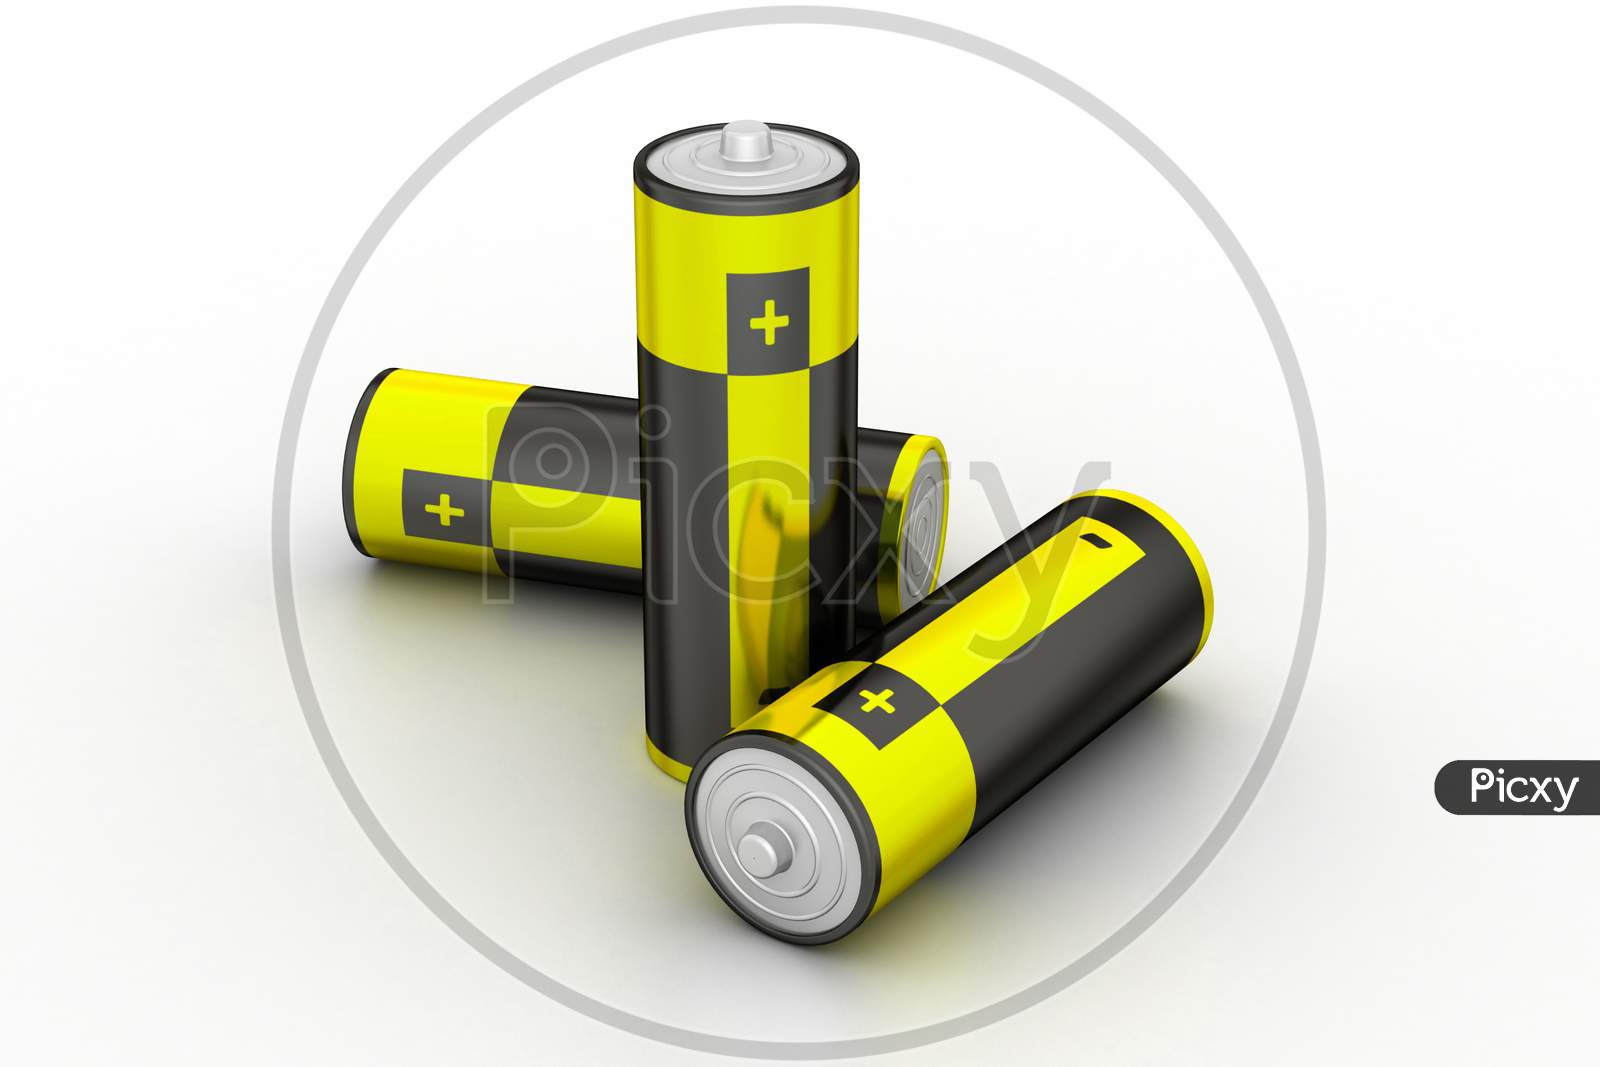 Batteries In White Background